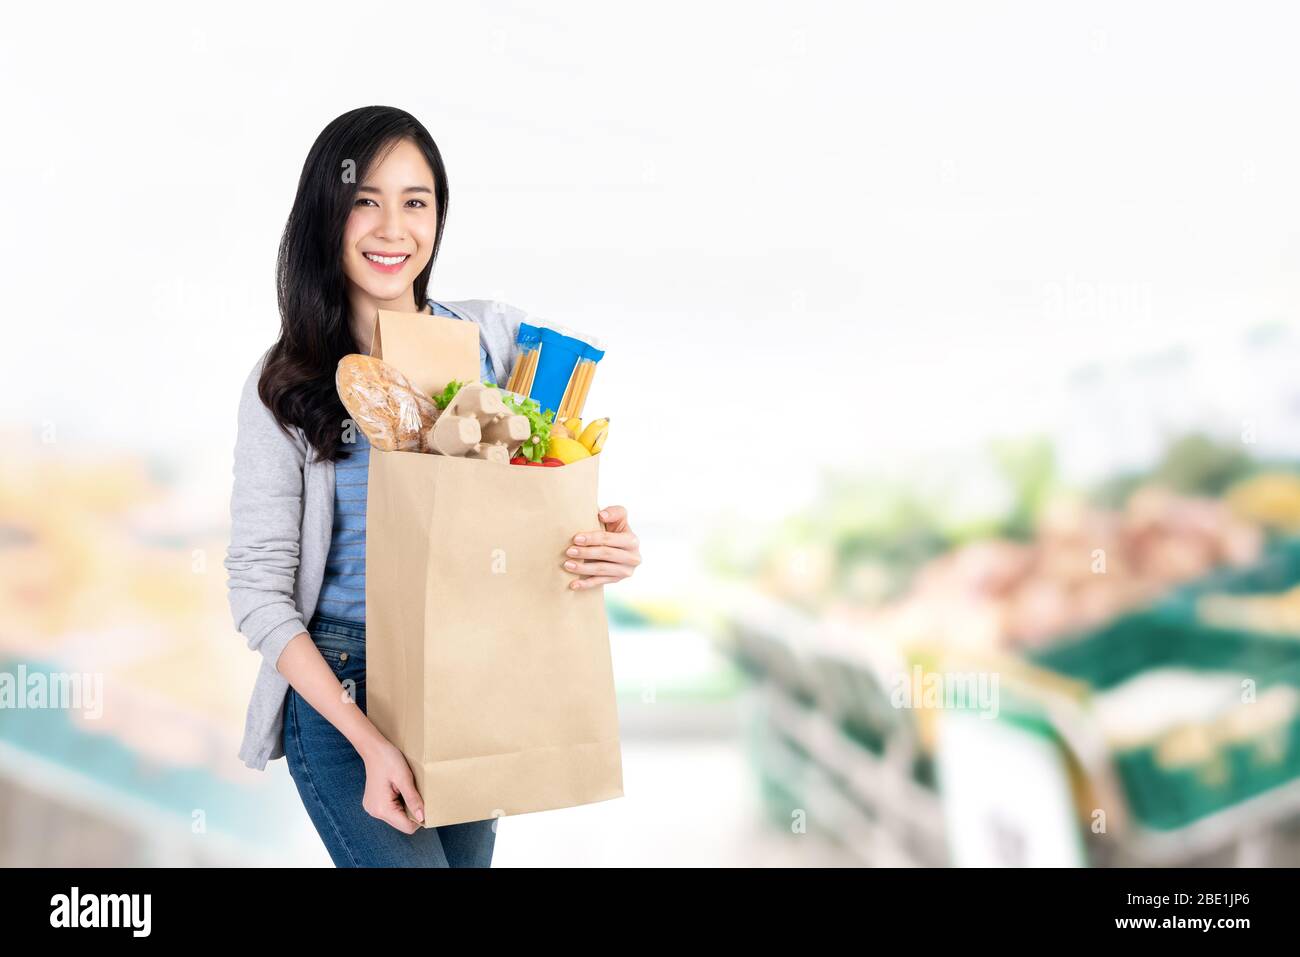 Beautiful smiling Asian woman holding paper shopping bag full of groceries in supermarket background with copy space Stock Photo